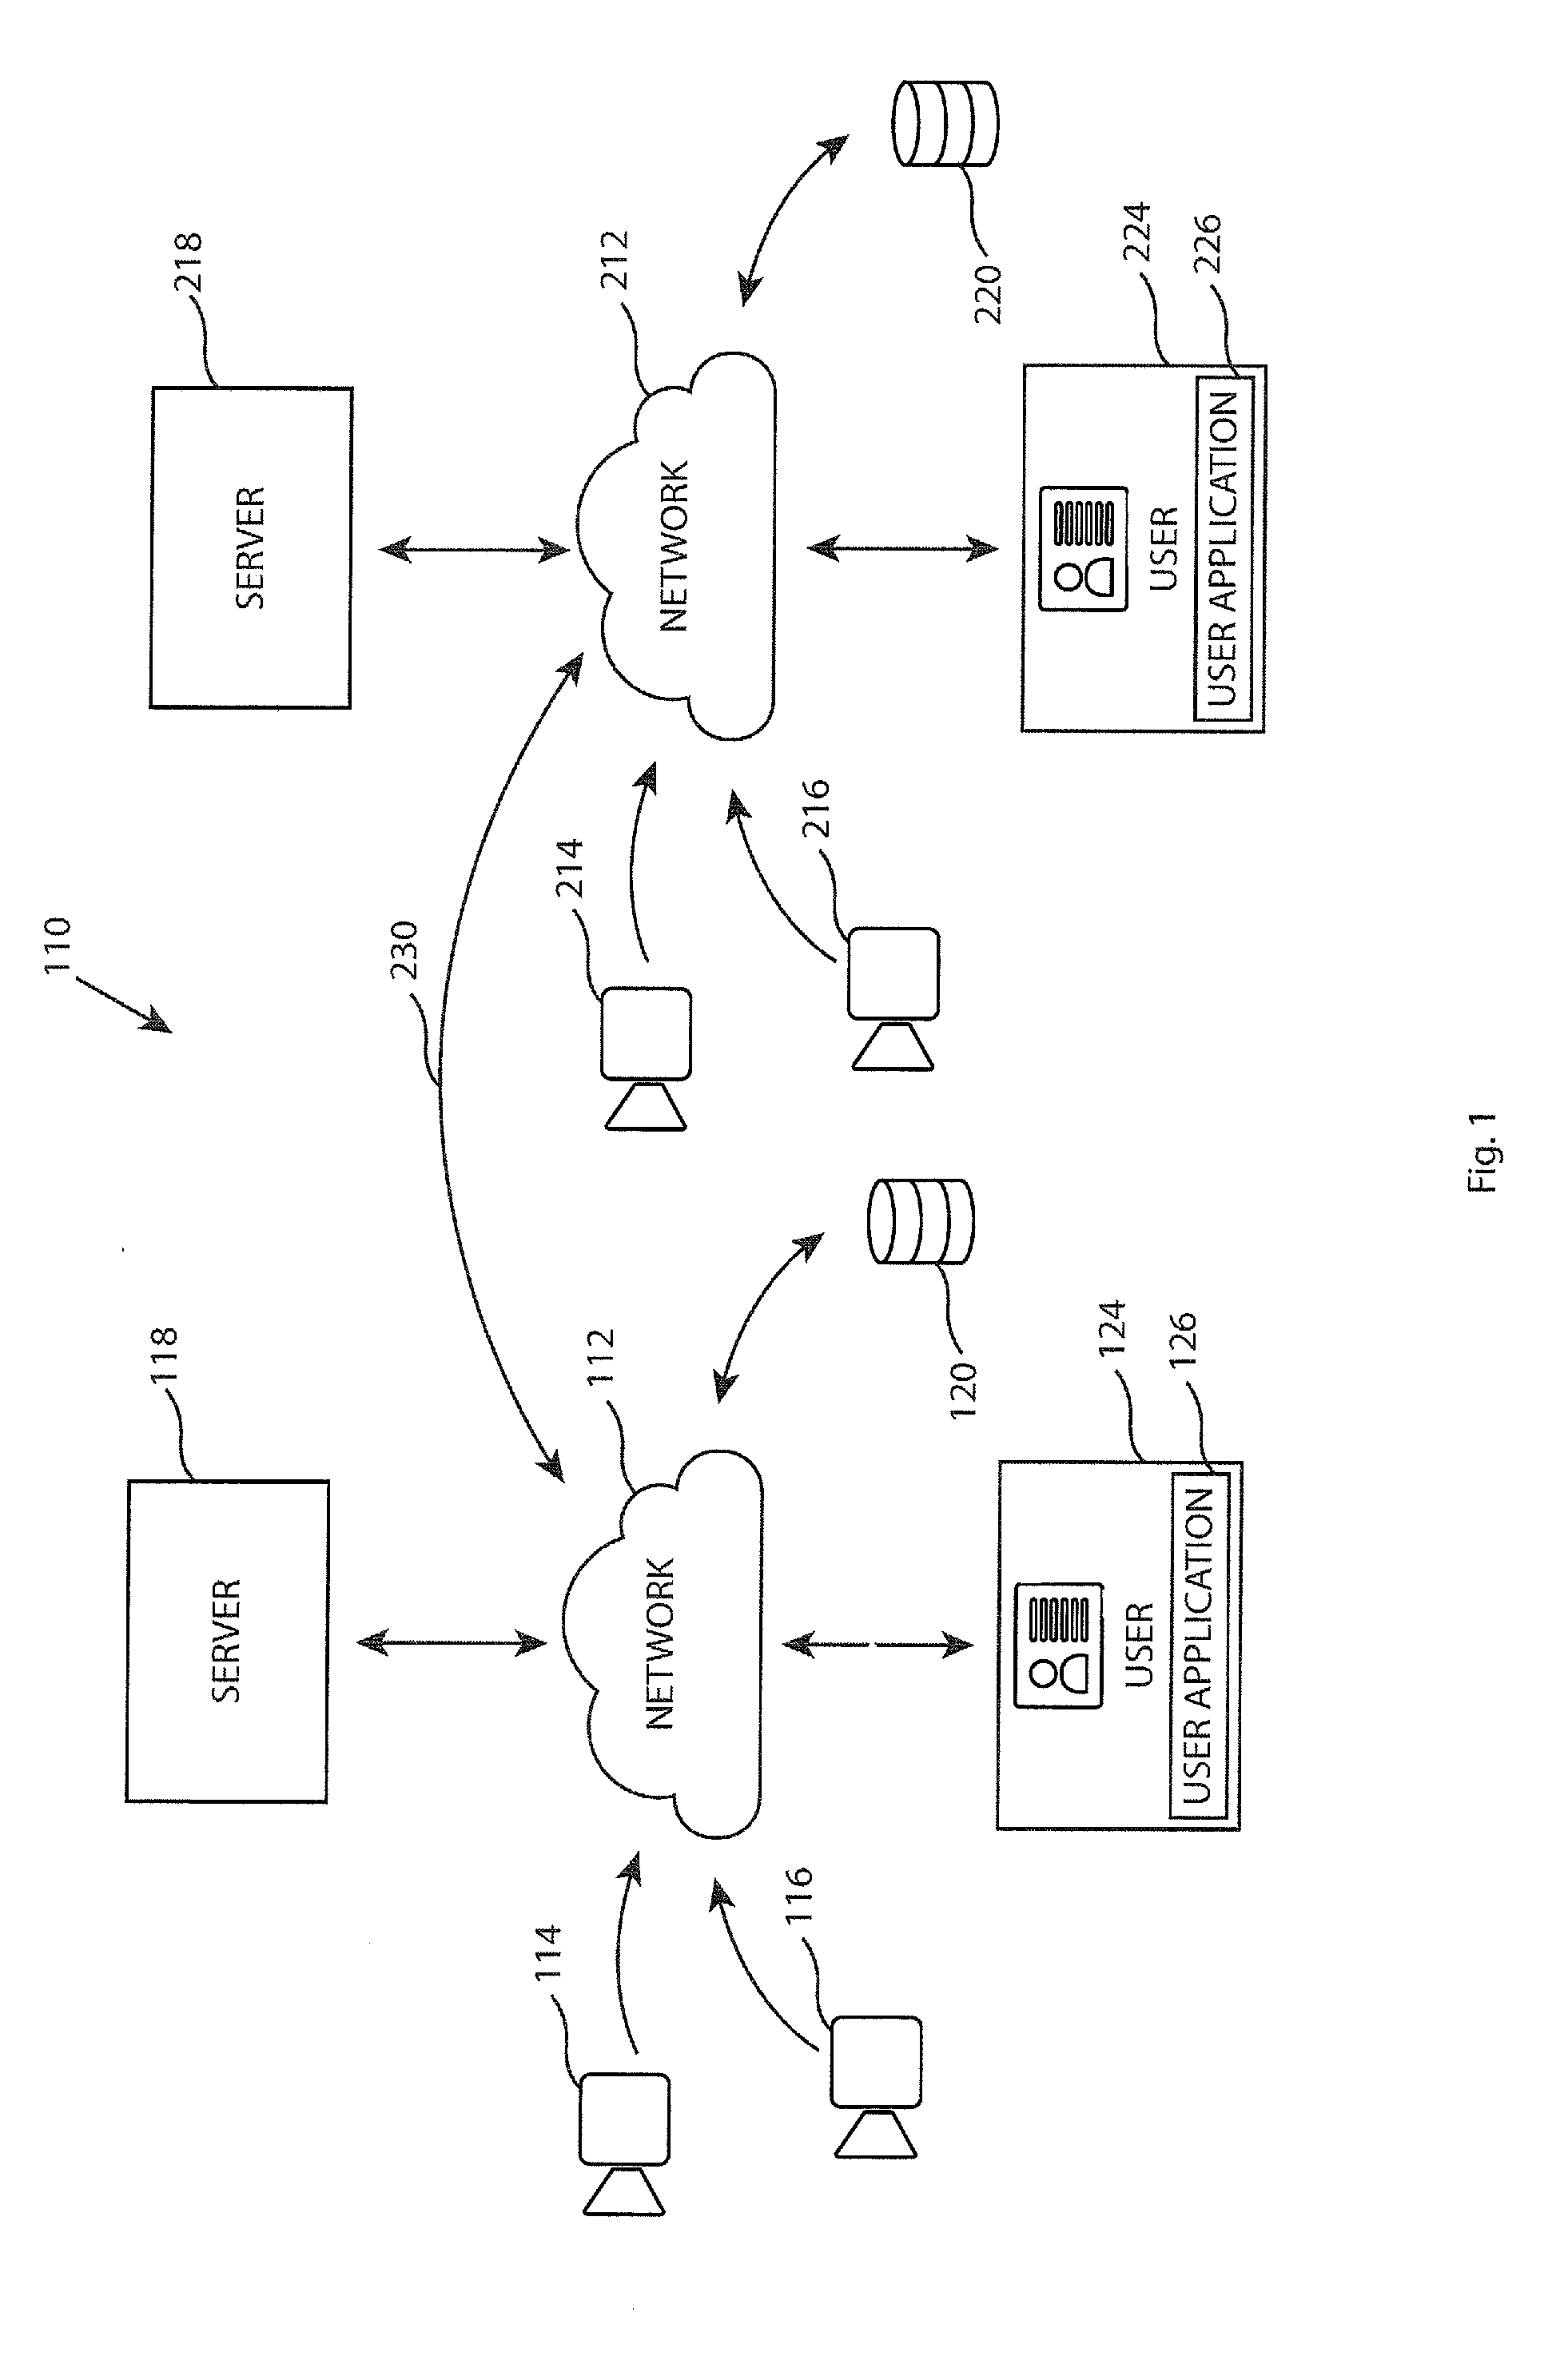 Method And System For Facial And Object Recognition Using Metadata Heuristic Search